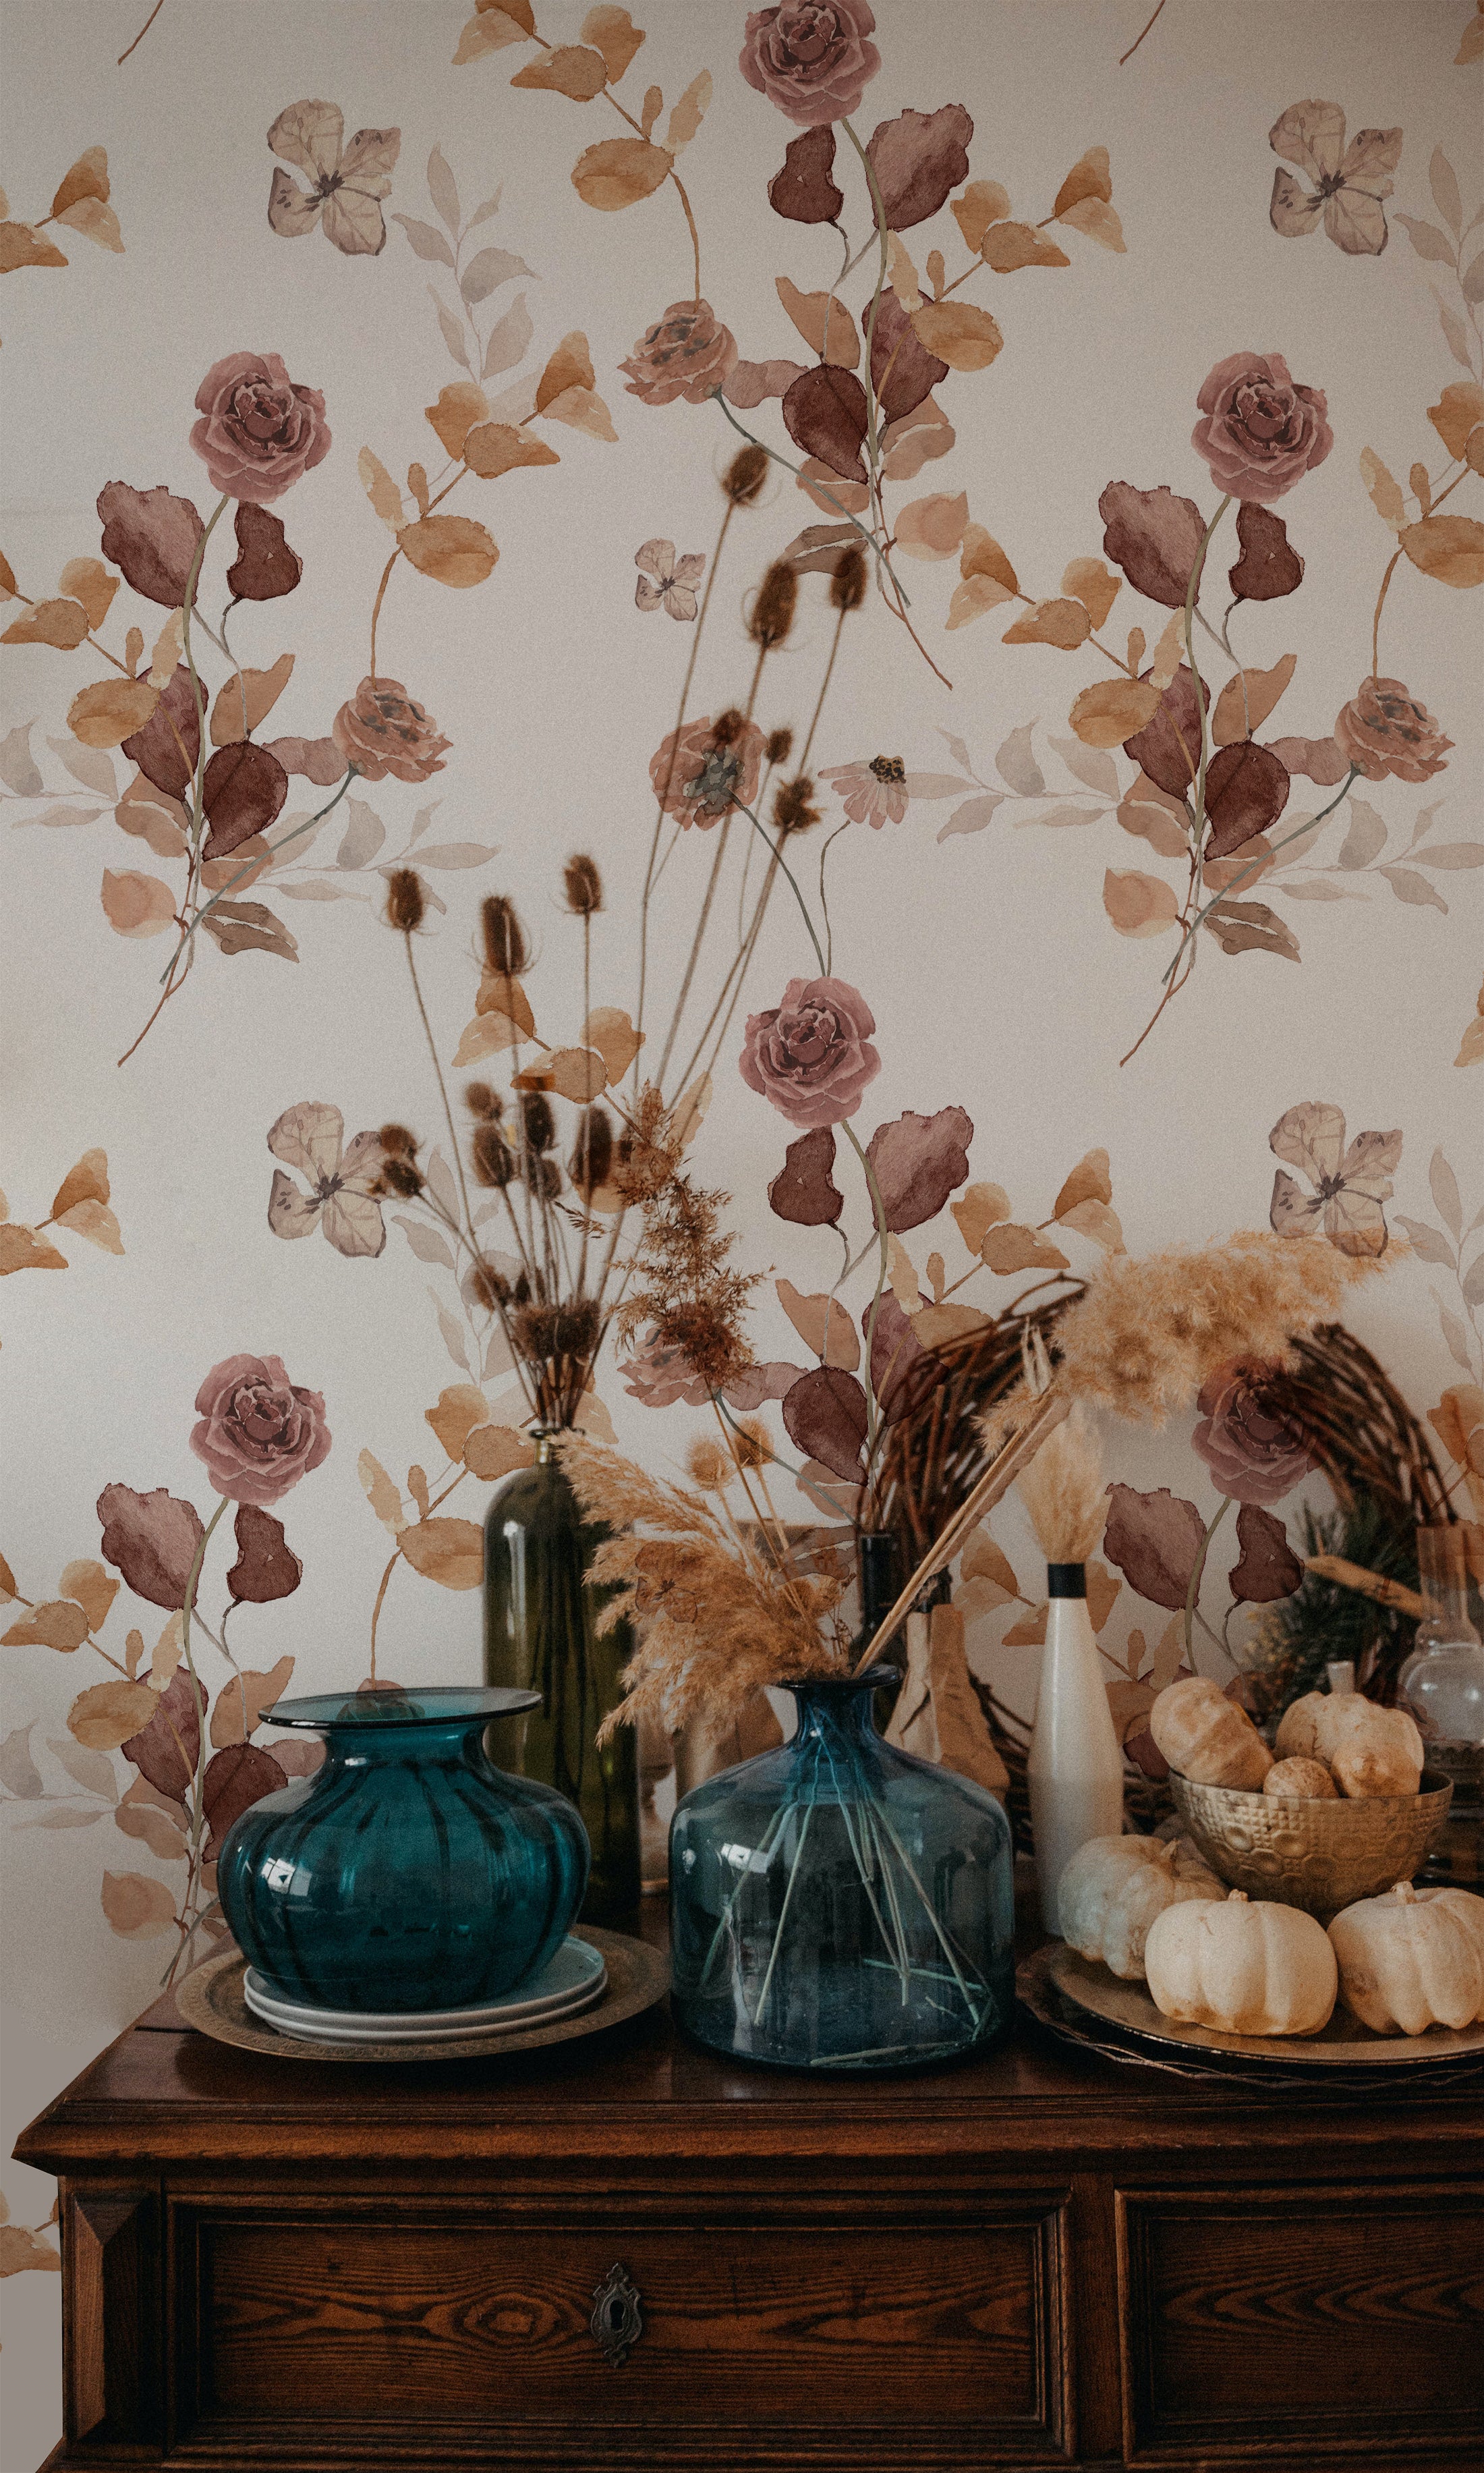 Seasonal Inspirations: How to Update Your Space with Wallpapers for Different Seasons or Holiday